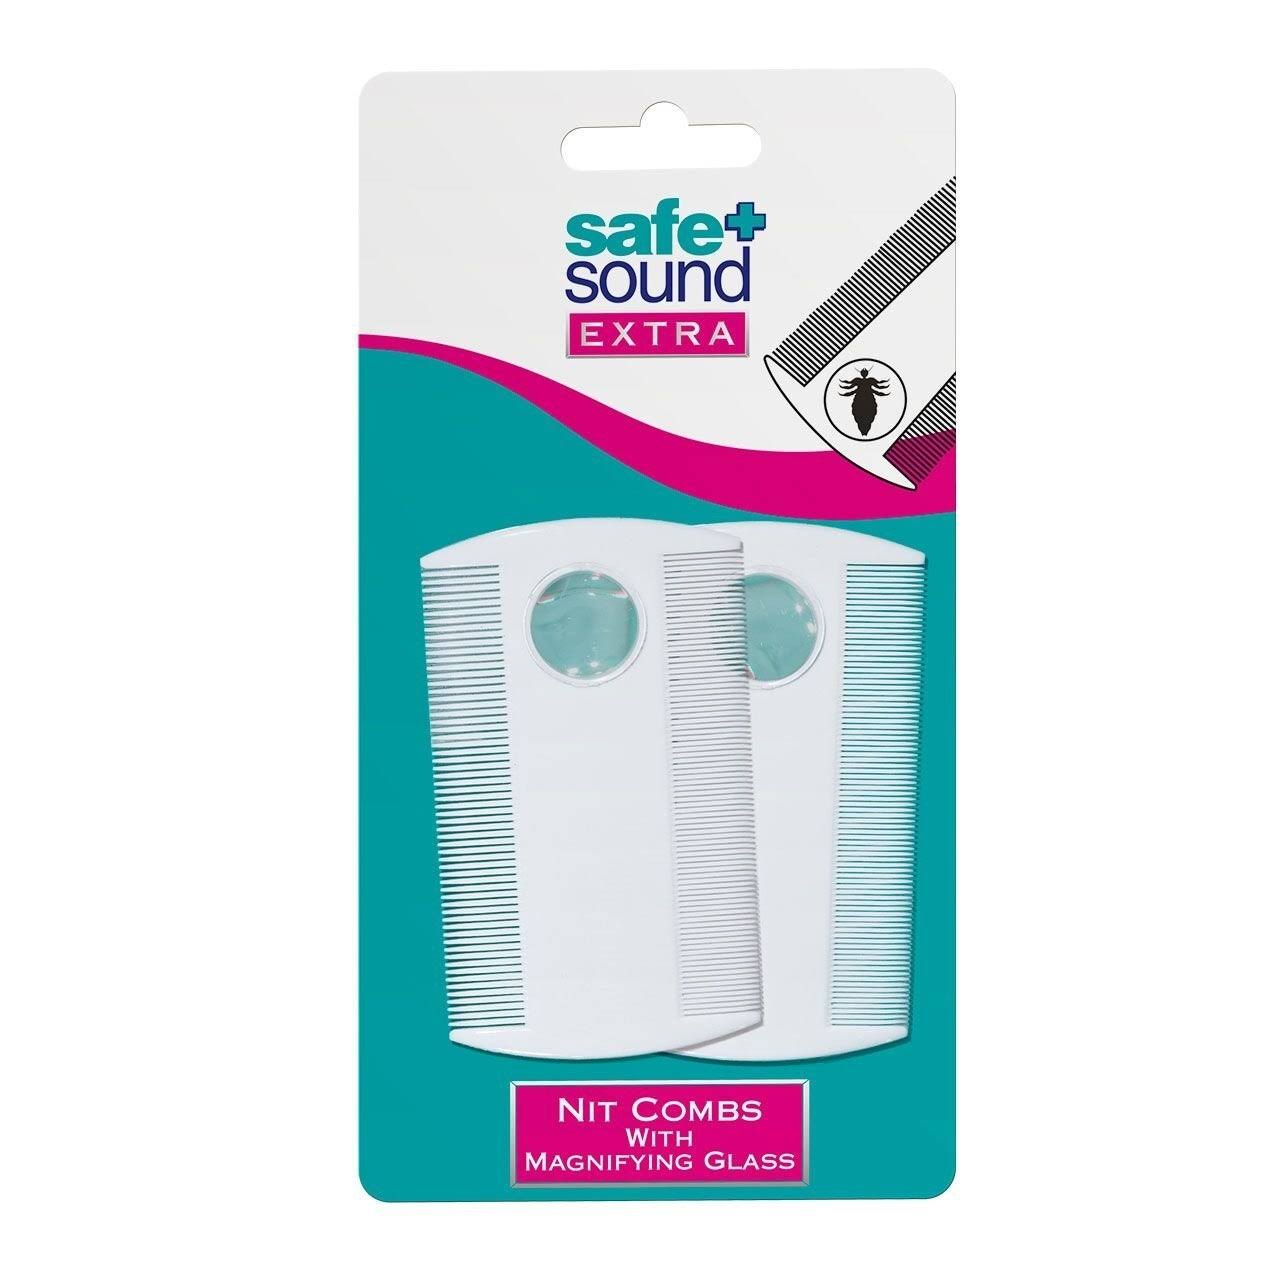 Safe + Sound Health Nit Combs & Magnifying Glass - 2 Pack